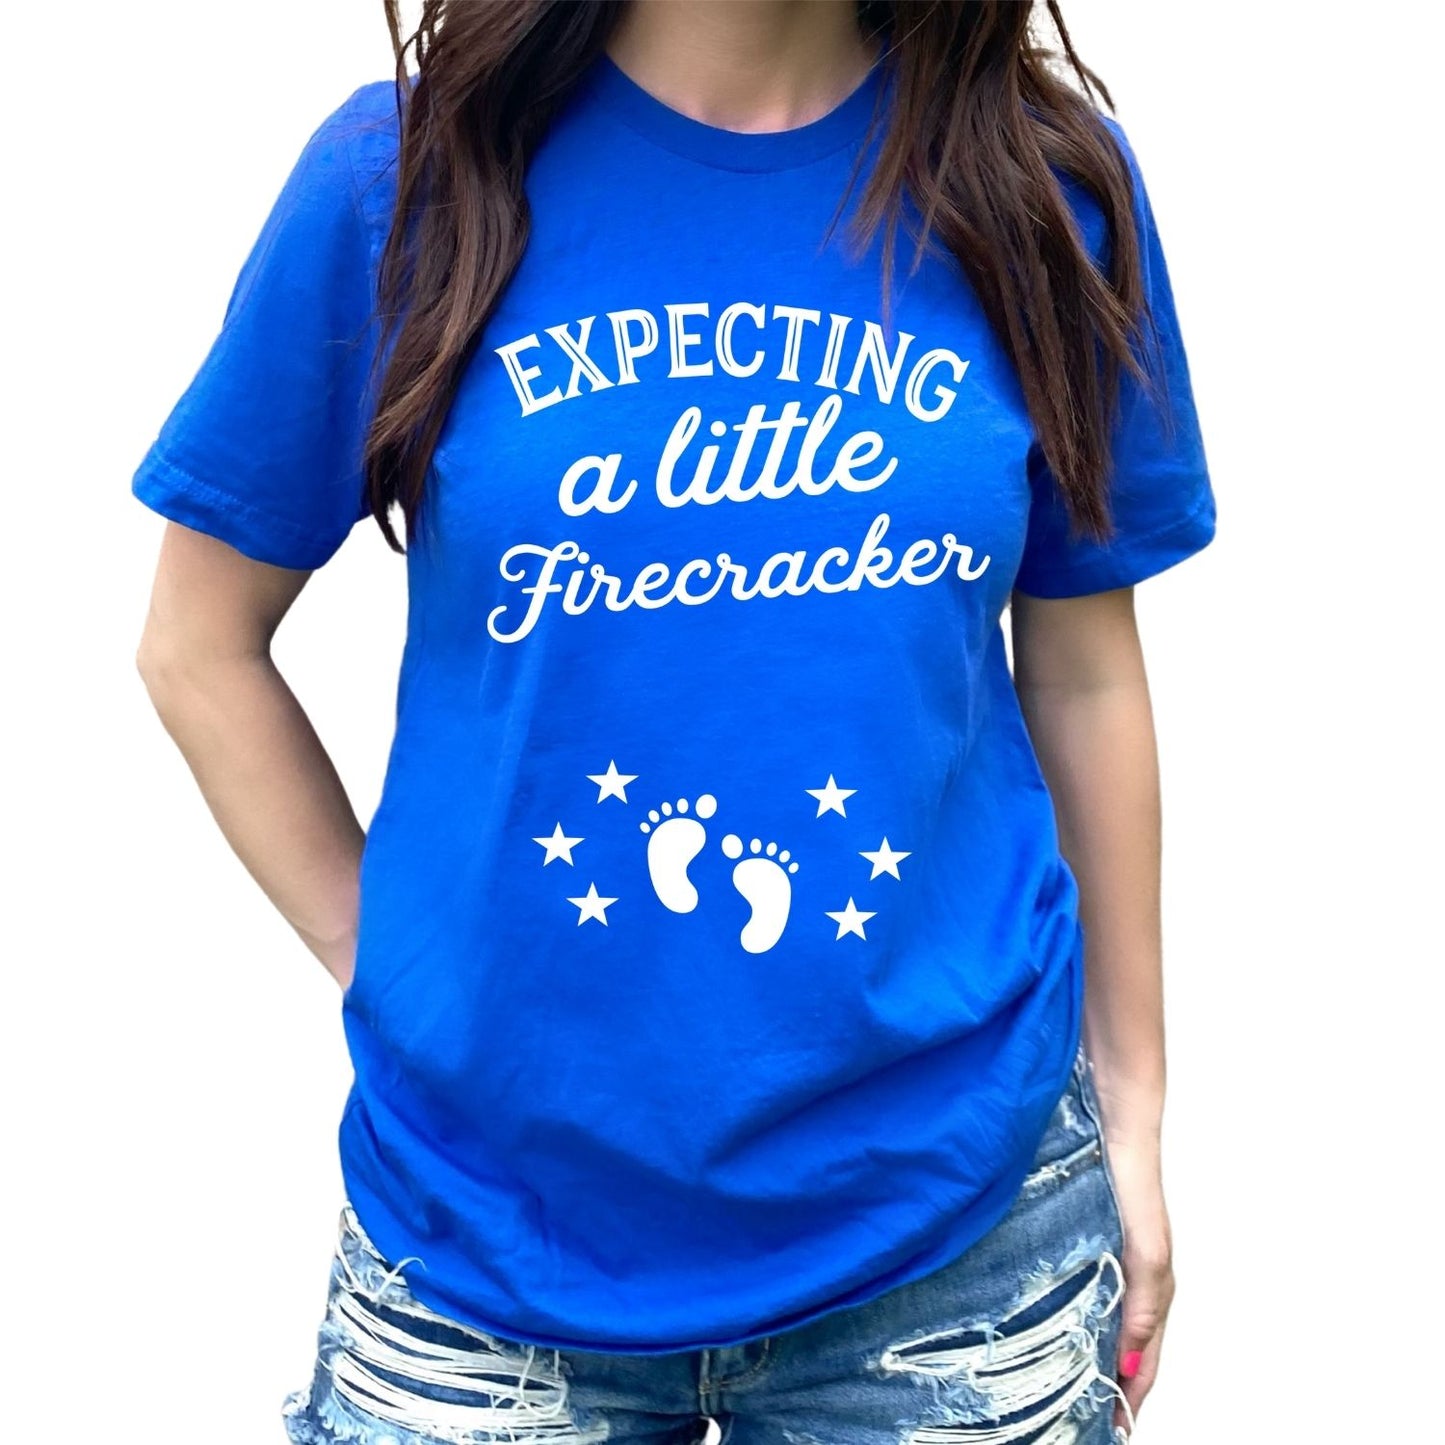 Couples July 4th Pregnancy Announcement Shirts